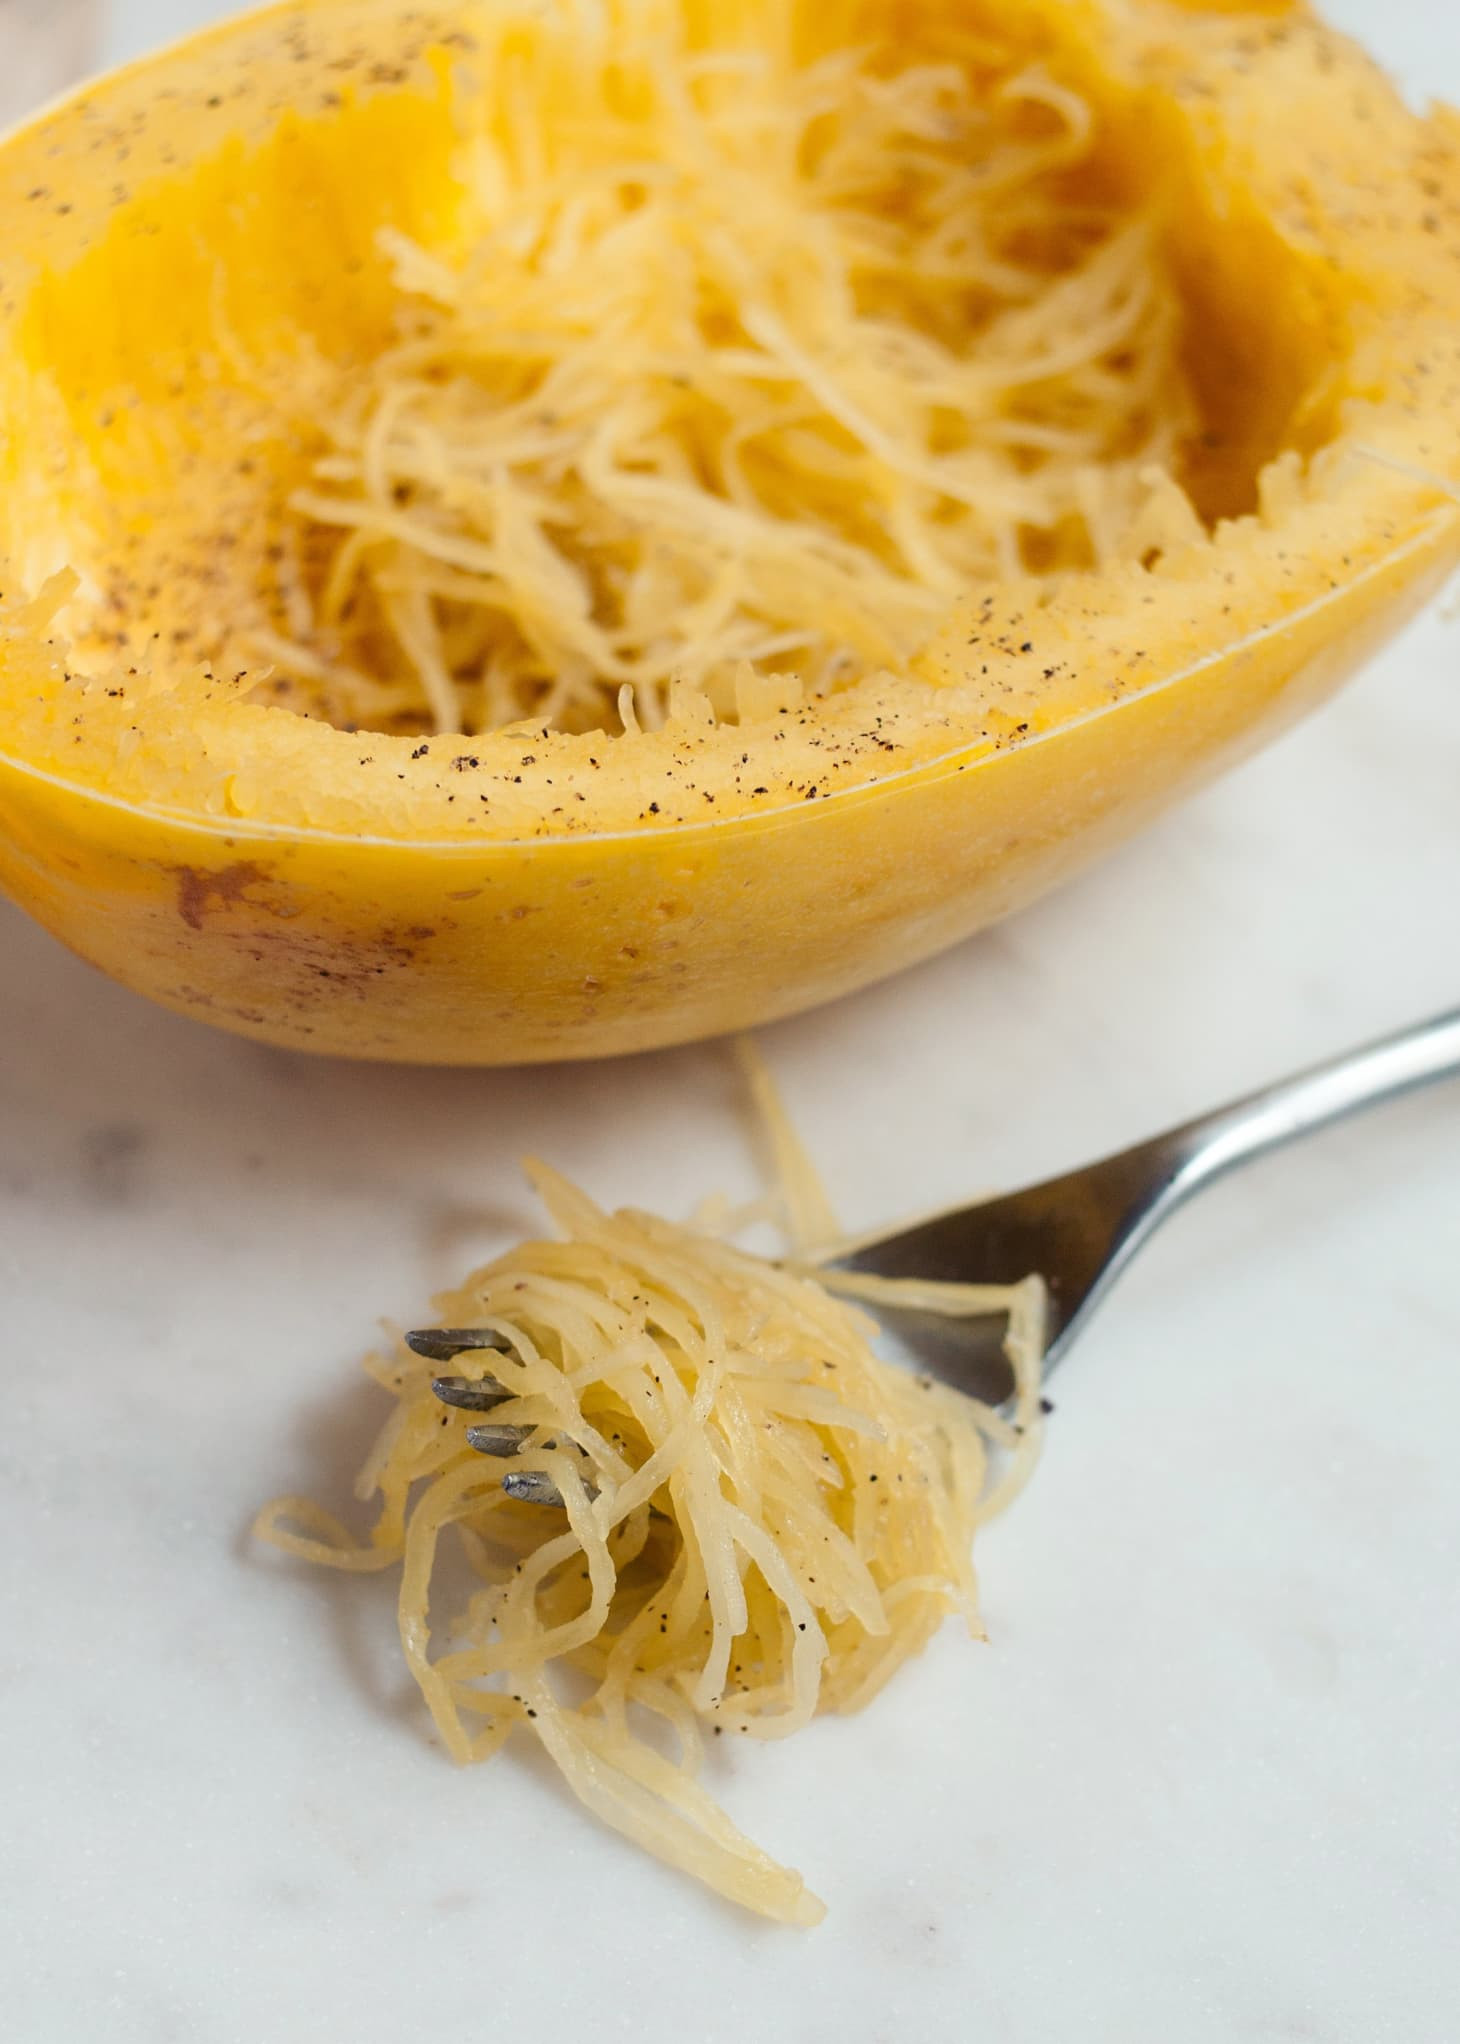 Cooking Spaghetti Squash In The Microwave
 How To Cook Spaghetti Squash in the Microwave